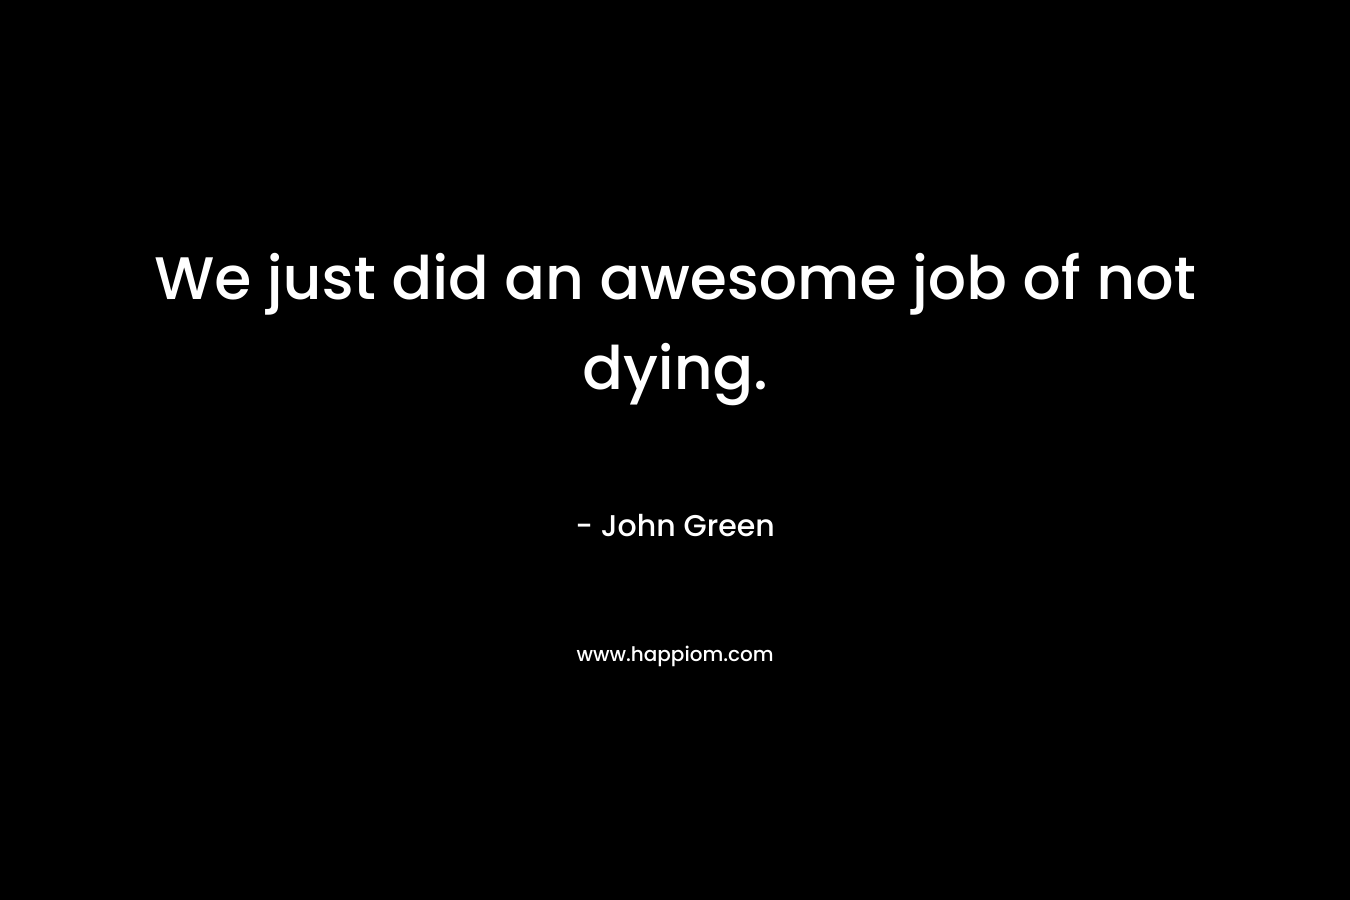 We just did an awesome job of not dying. – John Green